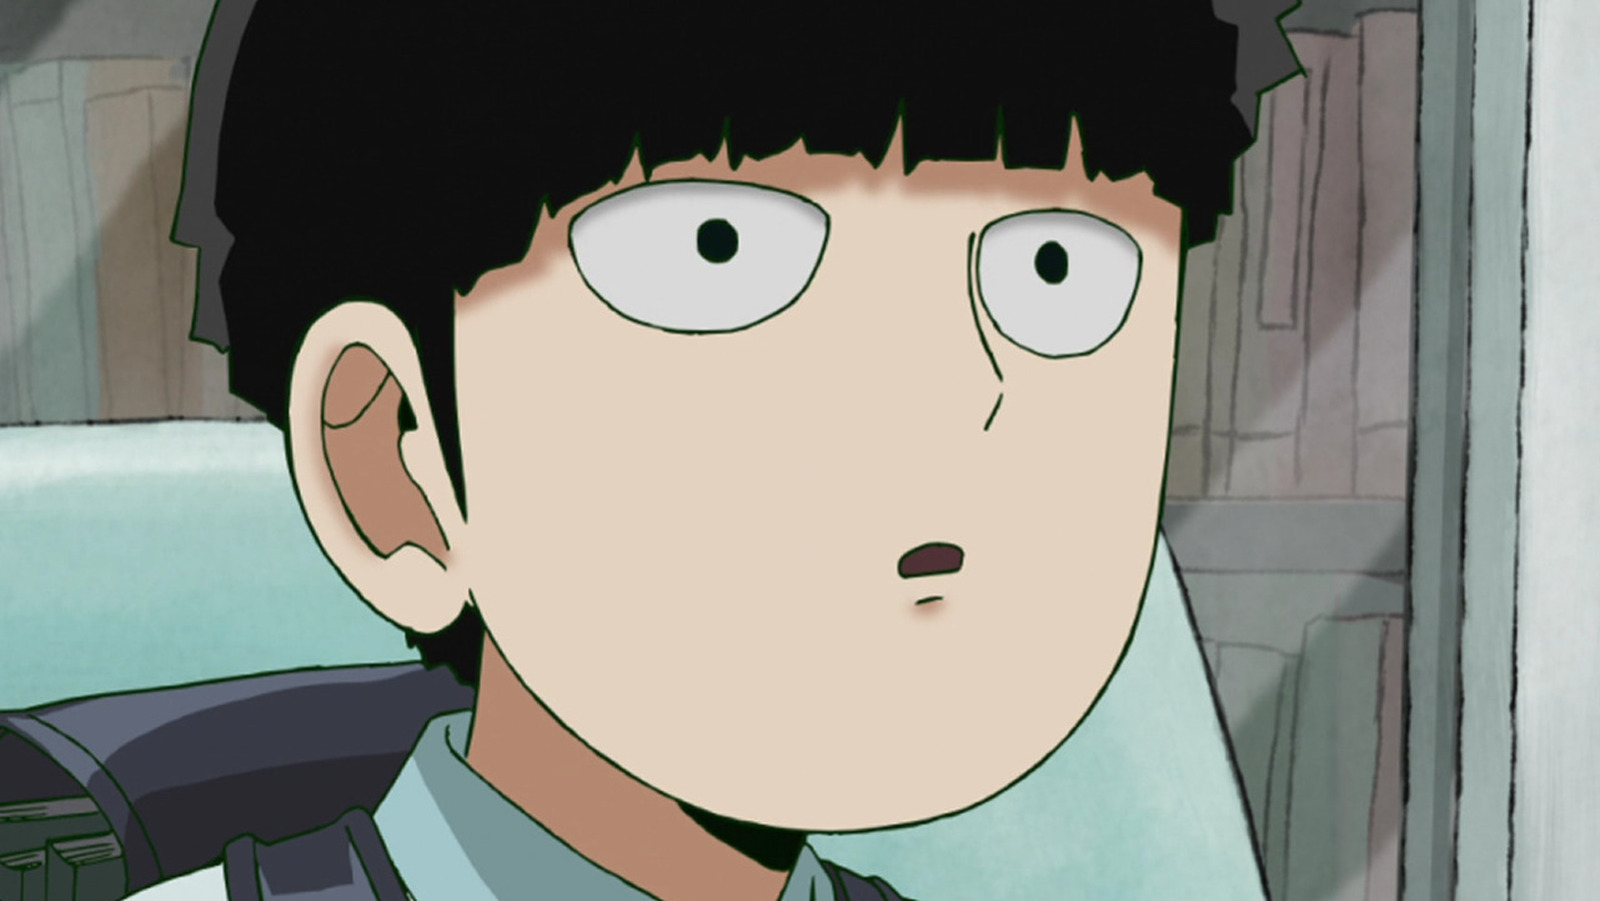 The Latest Mob Psycho 100 News Doesn't Bode Well For Season 3